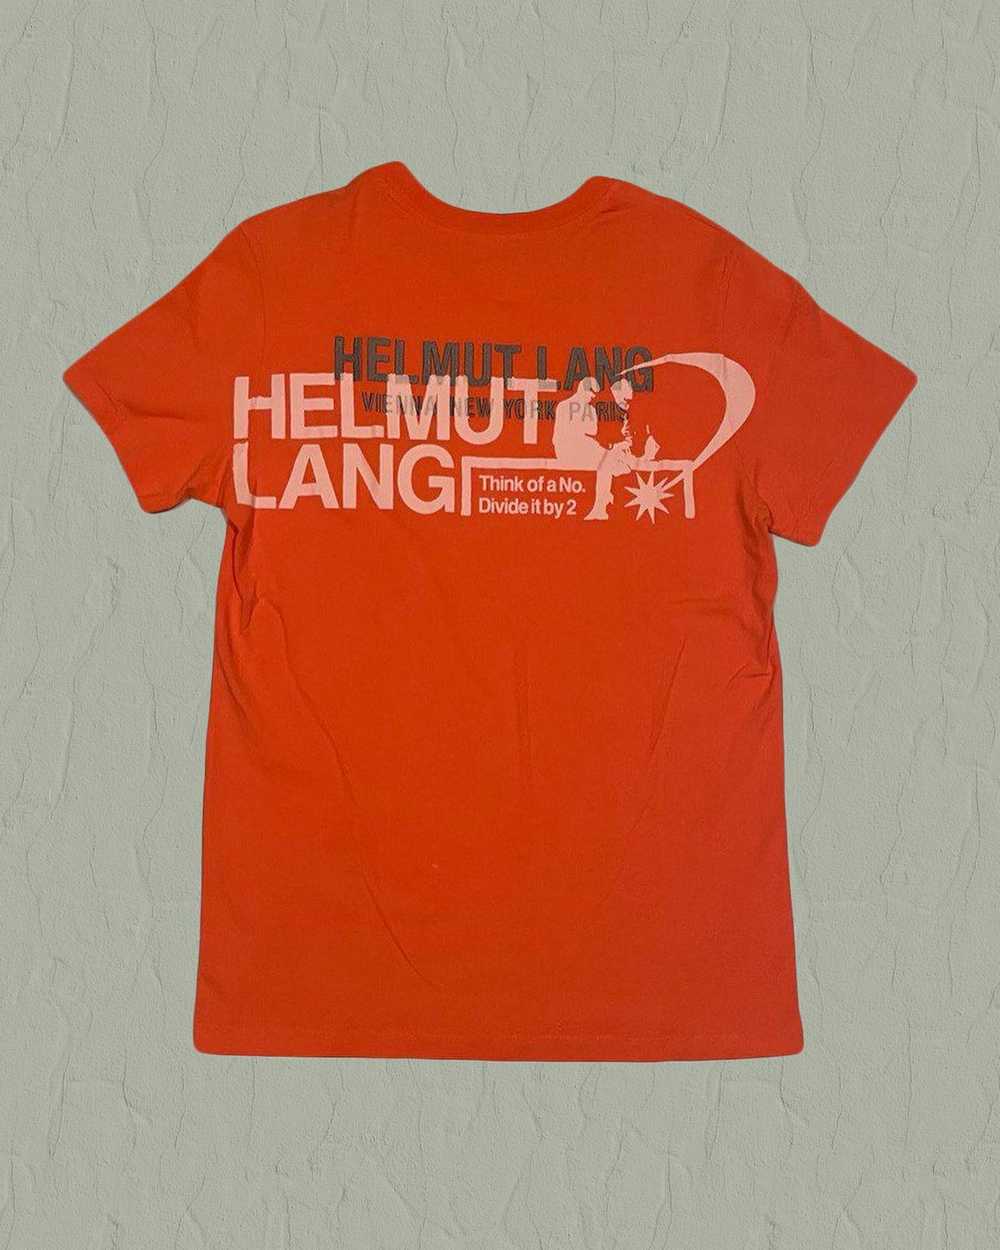 Helmut Lang Think of a No. Divide it by 2 Tee - image 2